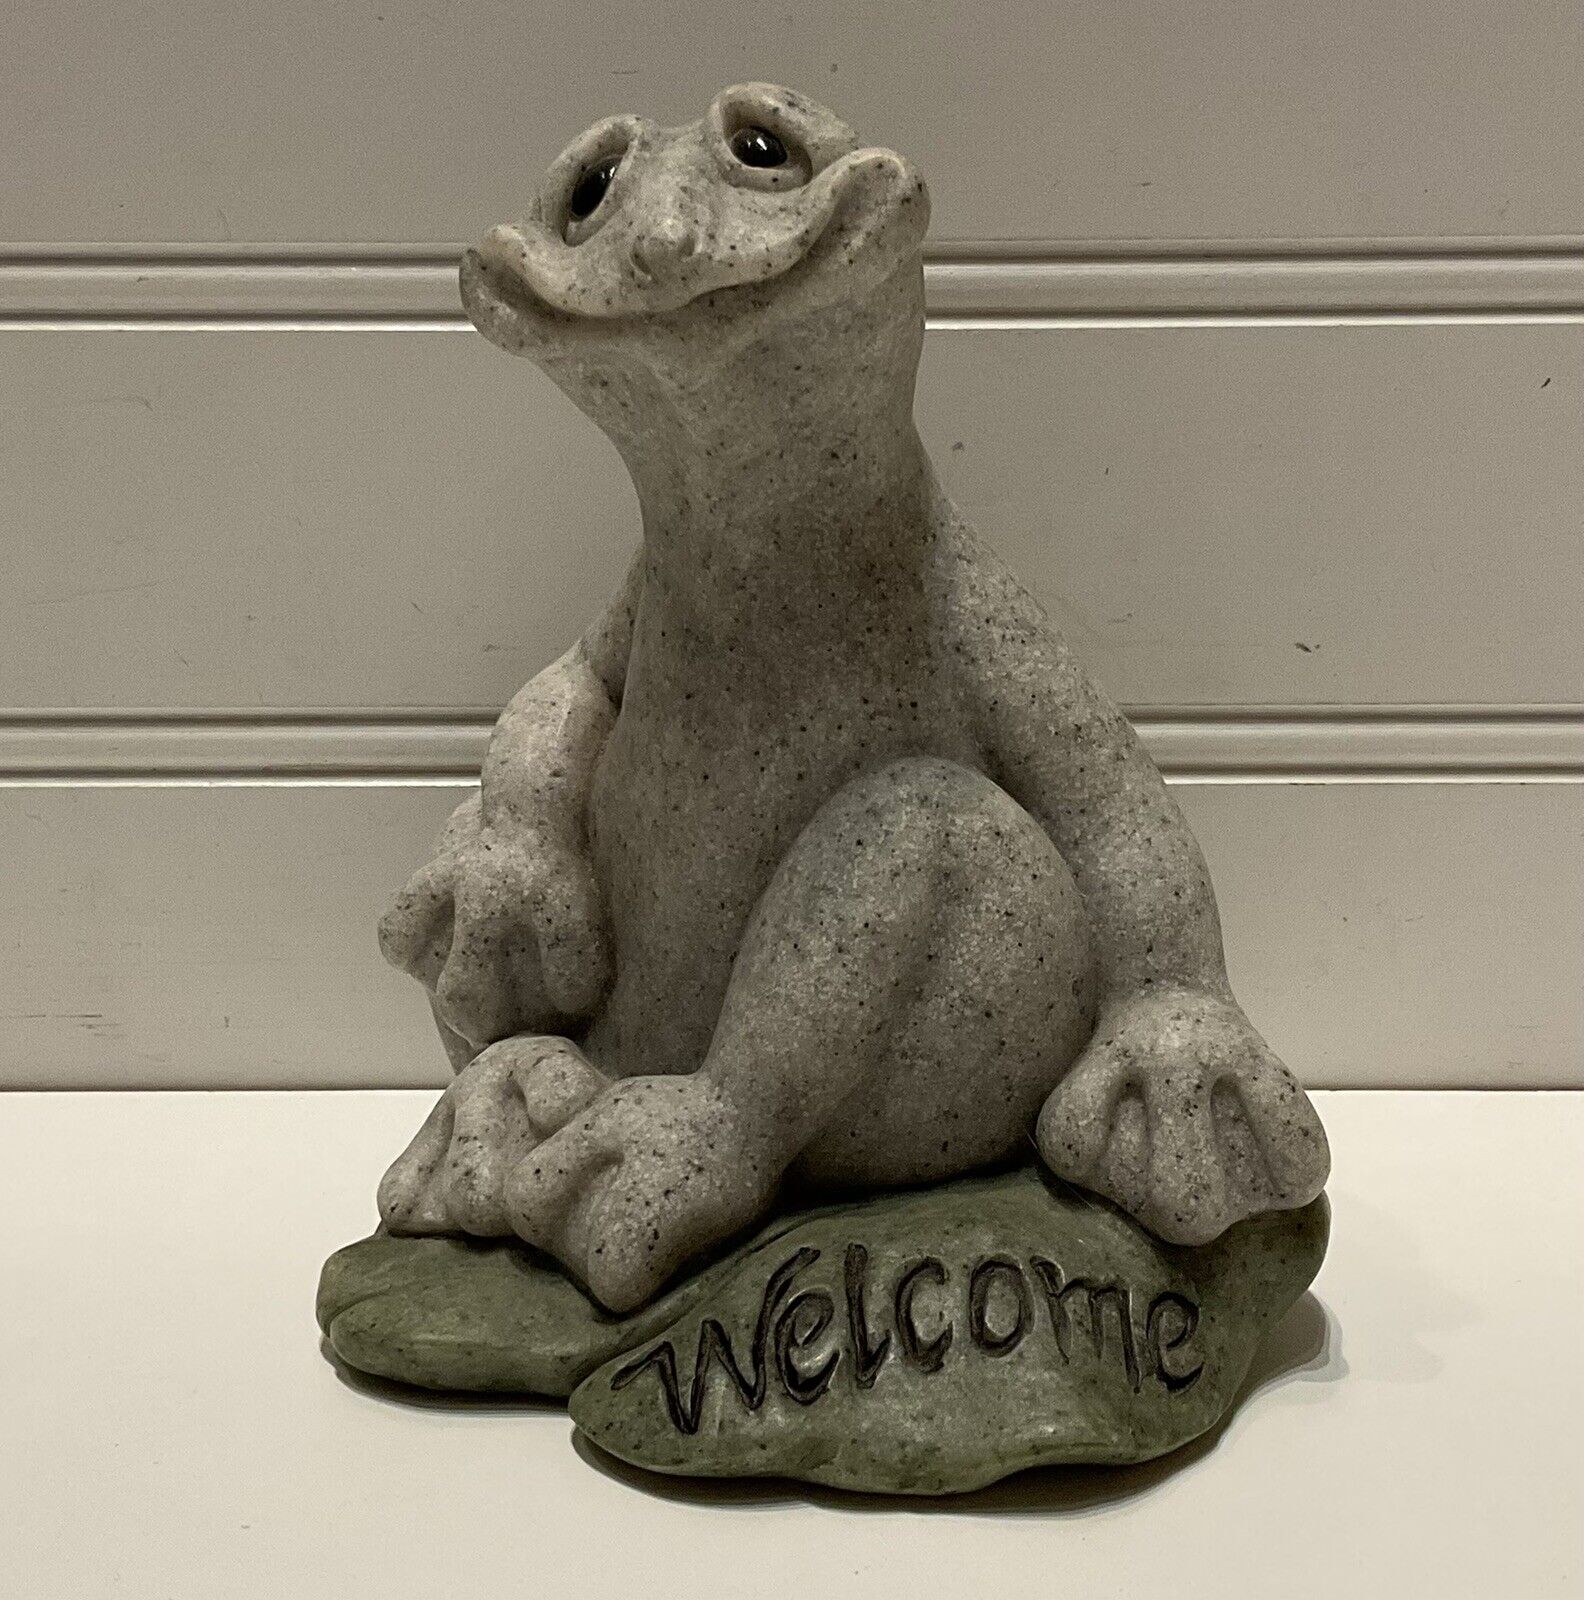 2005 Quarry Critters #45337 Frog Felix’s Welcome 5” Figurine